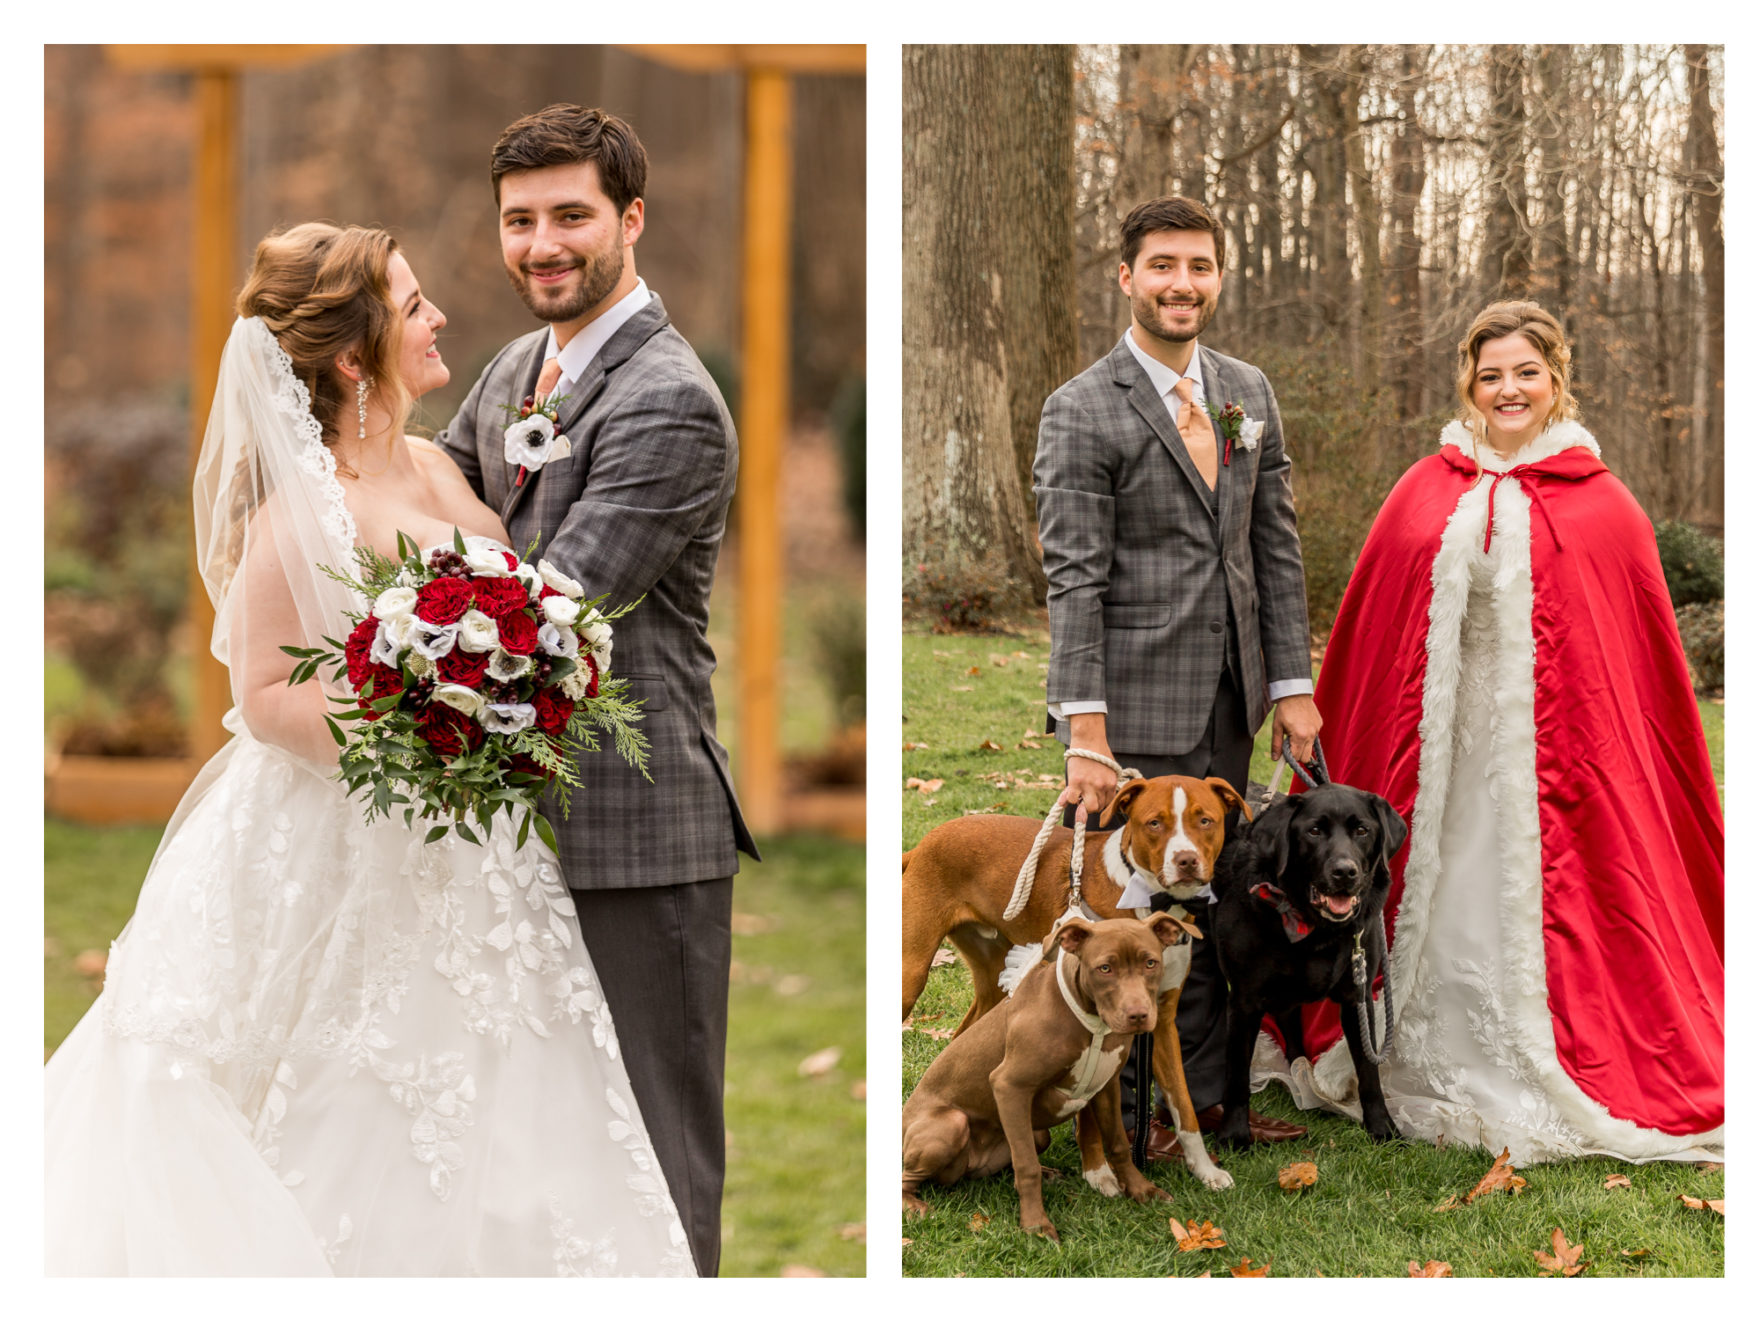 Winter Wedding. Beauty and the beast wedding. Green and red. Liriodendron mansion. Mansion Wedding. dog socks. florist's wedding. Roni's Roses. Covid wedding Pandemic wedding 